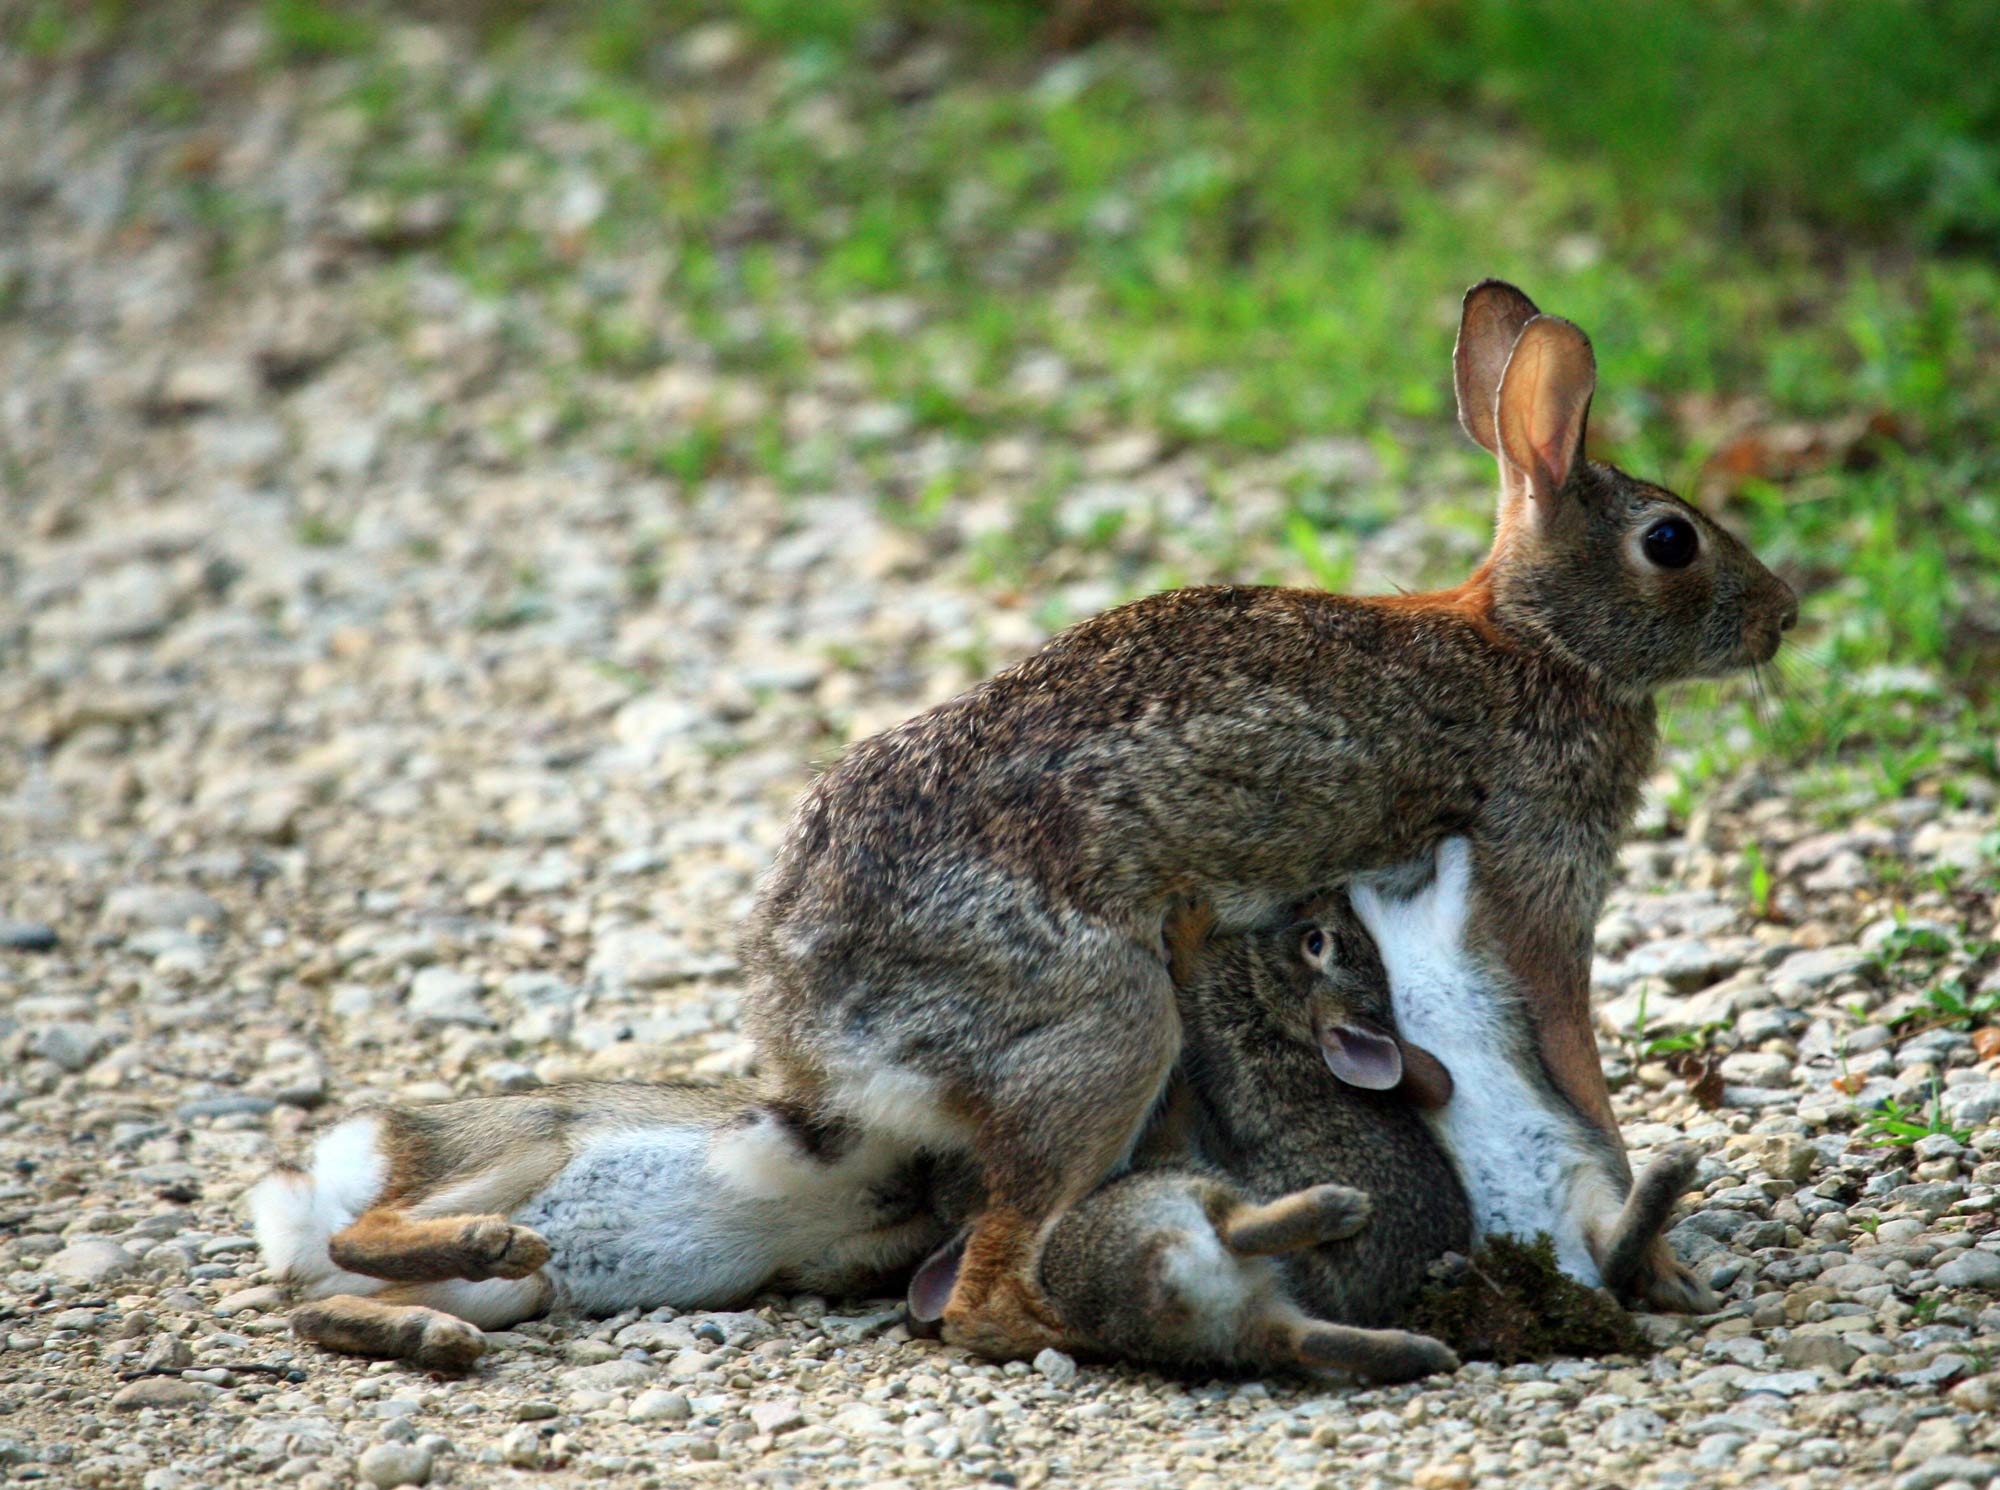 A rabbit with her babies.